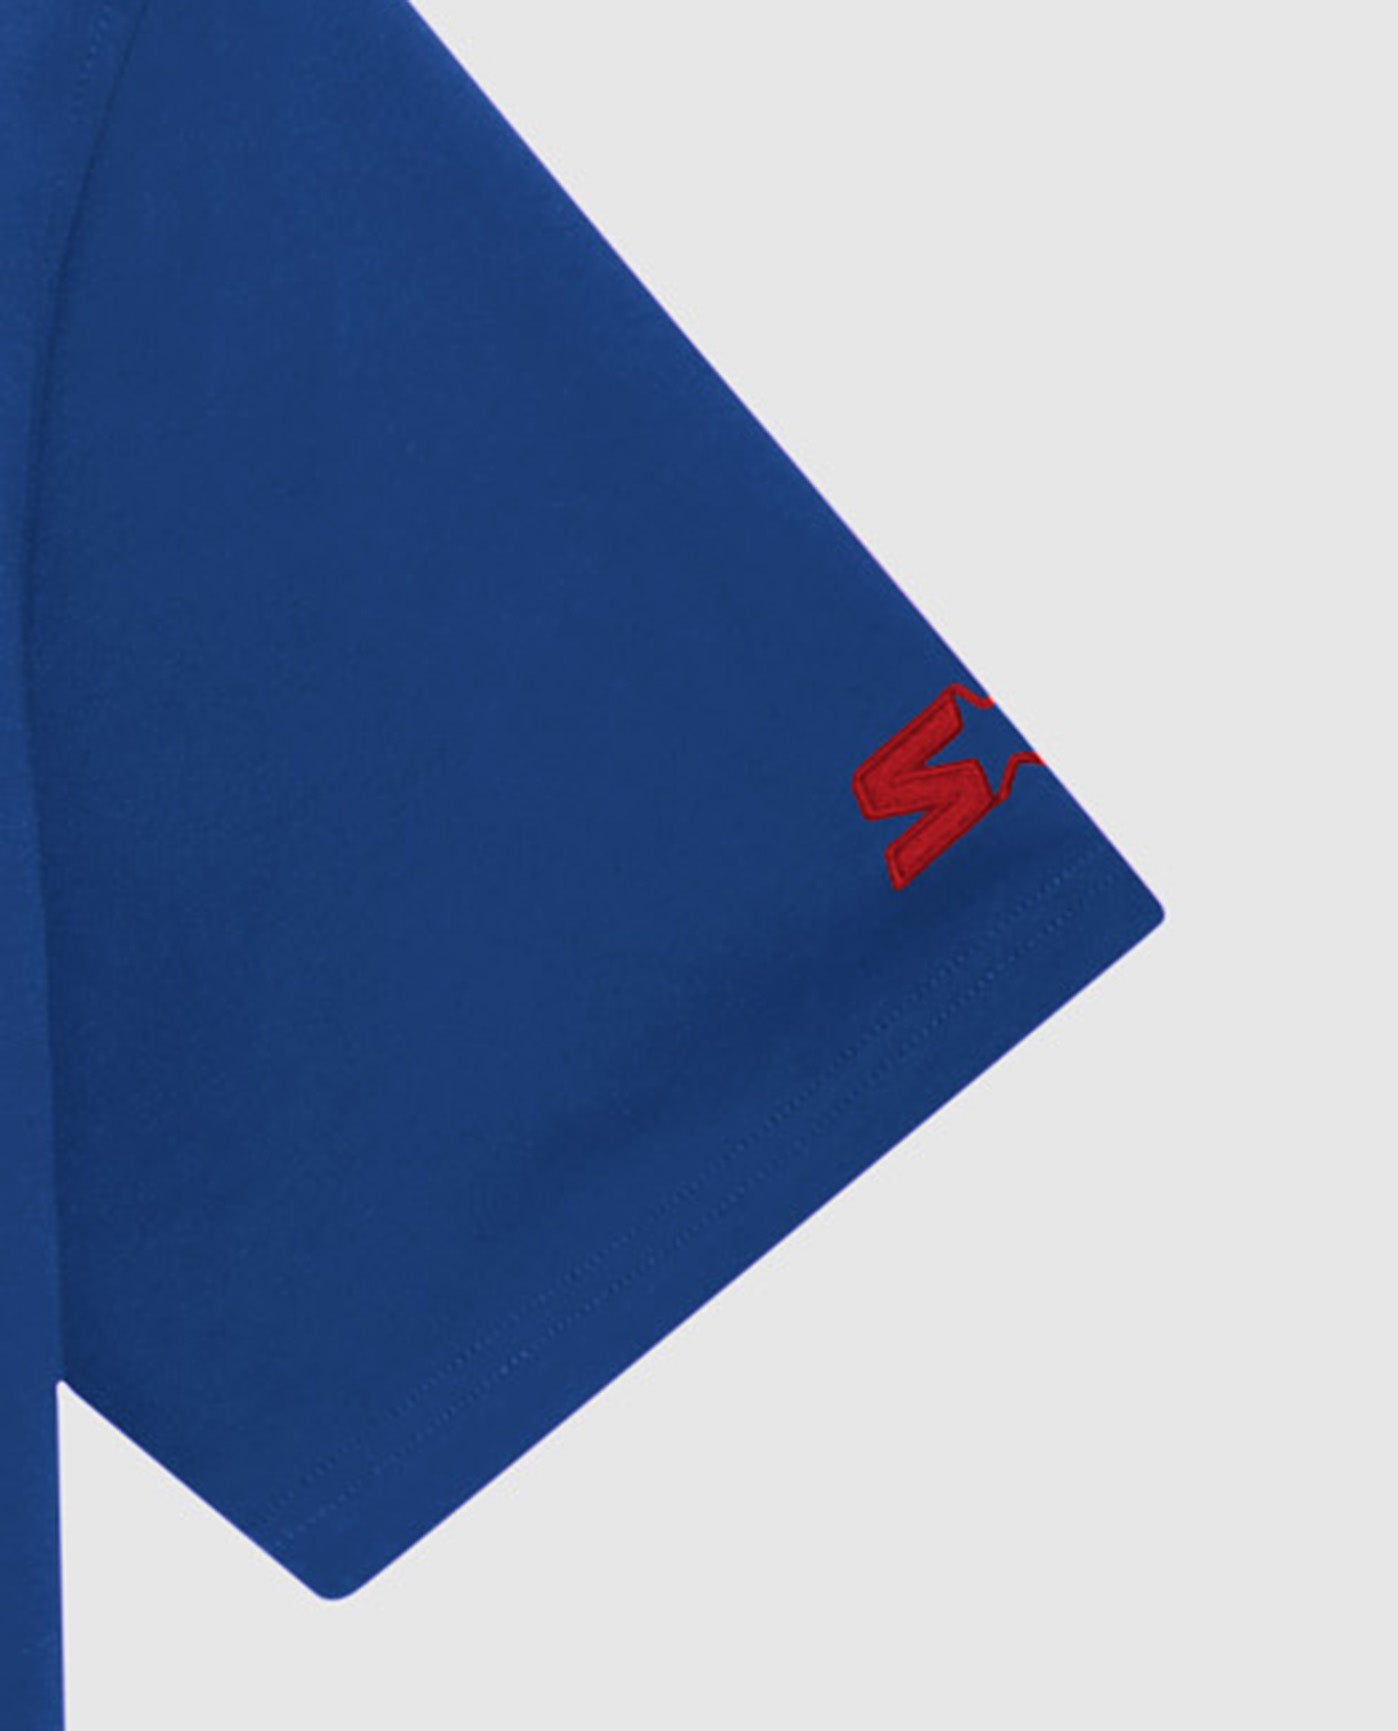 Sleeve Cuff of Starter Kenny Crew Neck Tee Royal Blue | Royal Blue